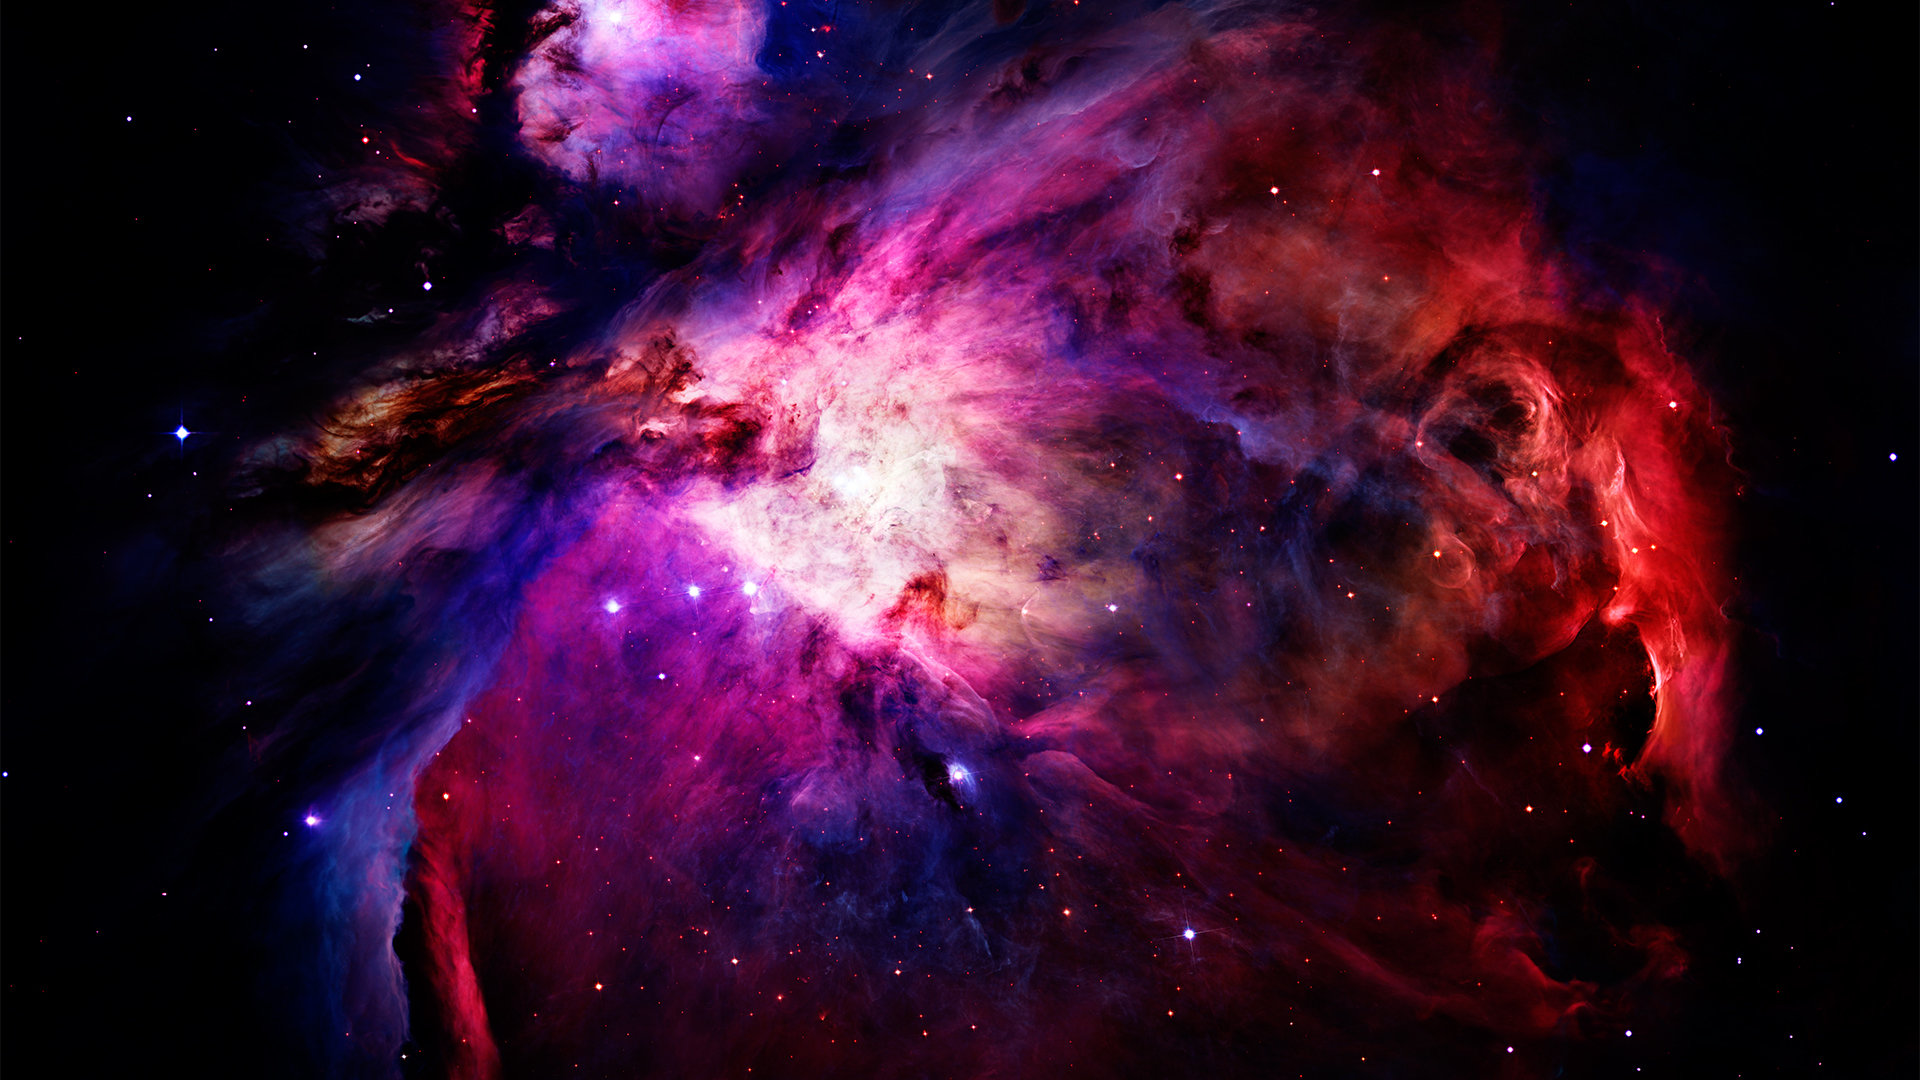 Top 155+ Hd space wallpapers for pc - Thejungledrummer.com